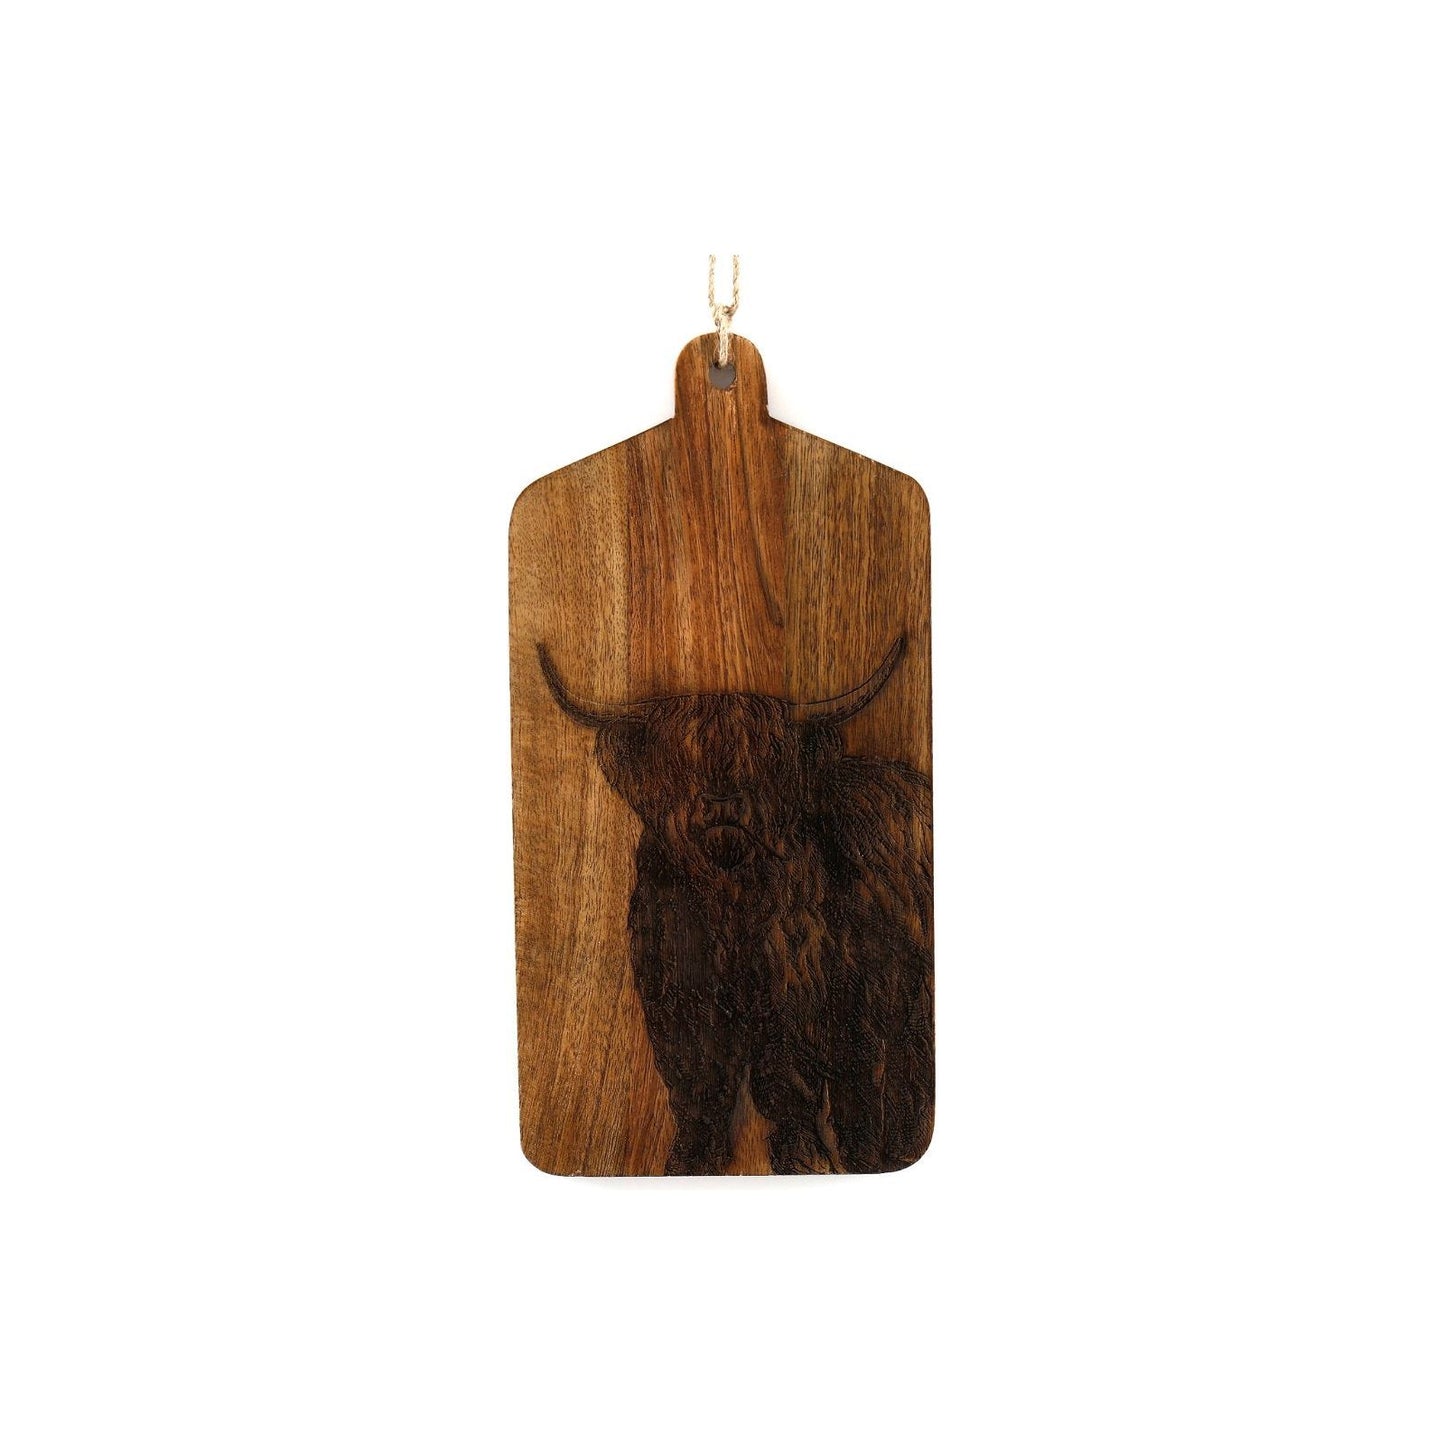 Highland Cow Engraved Wooden Cheese Board - Ashton and Finch